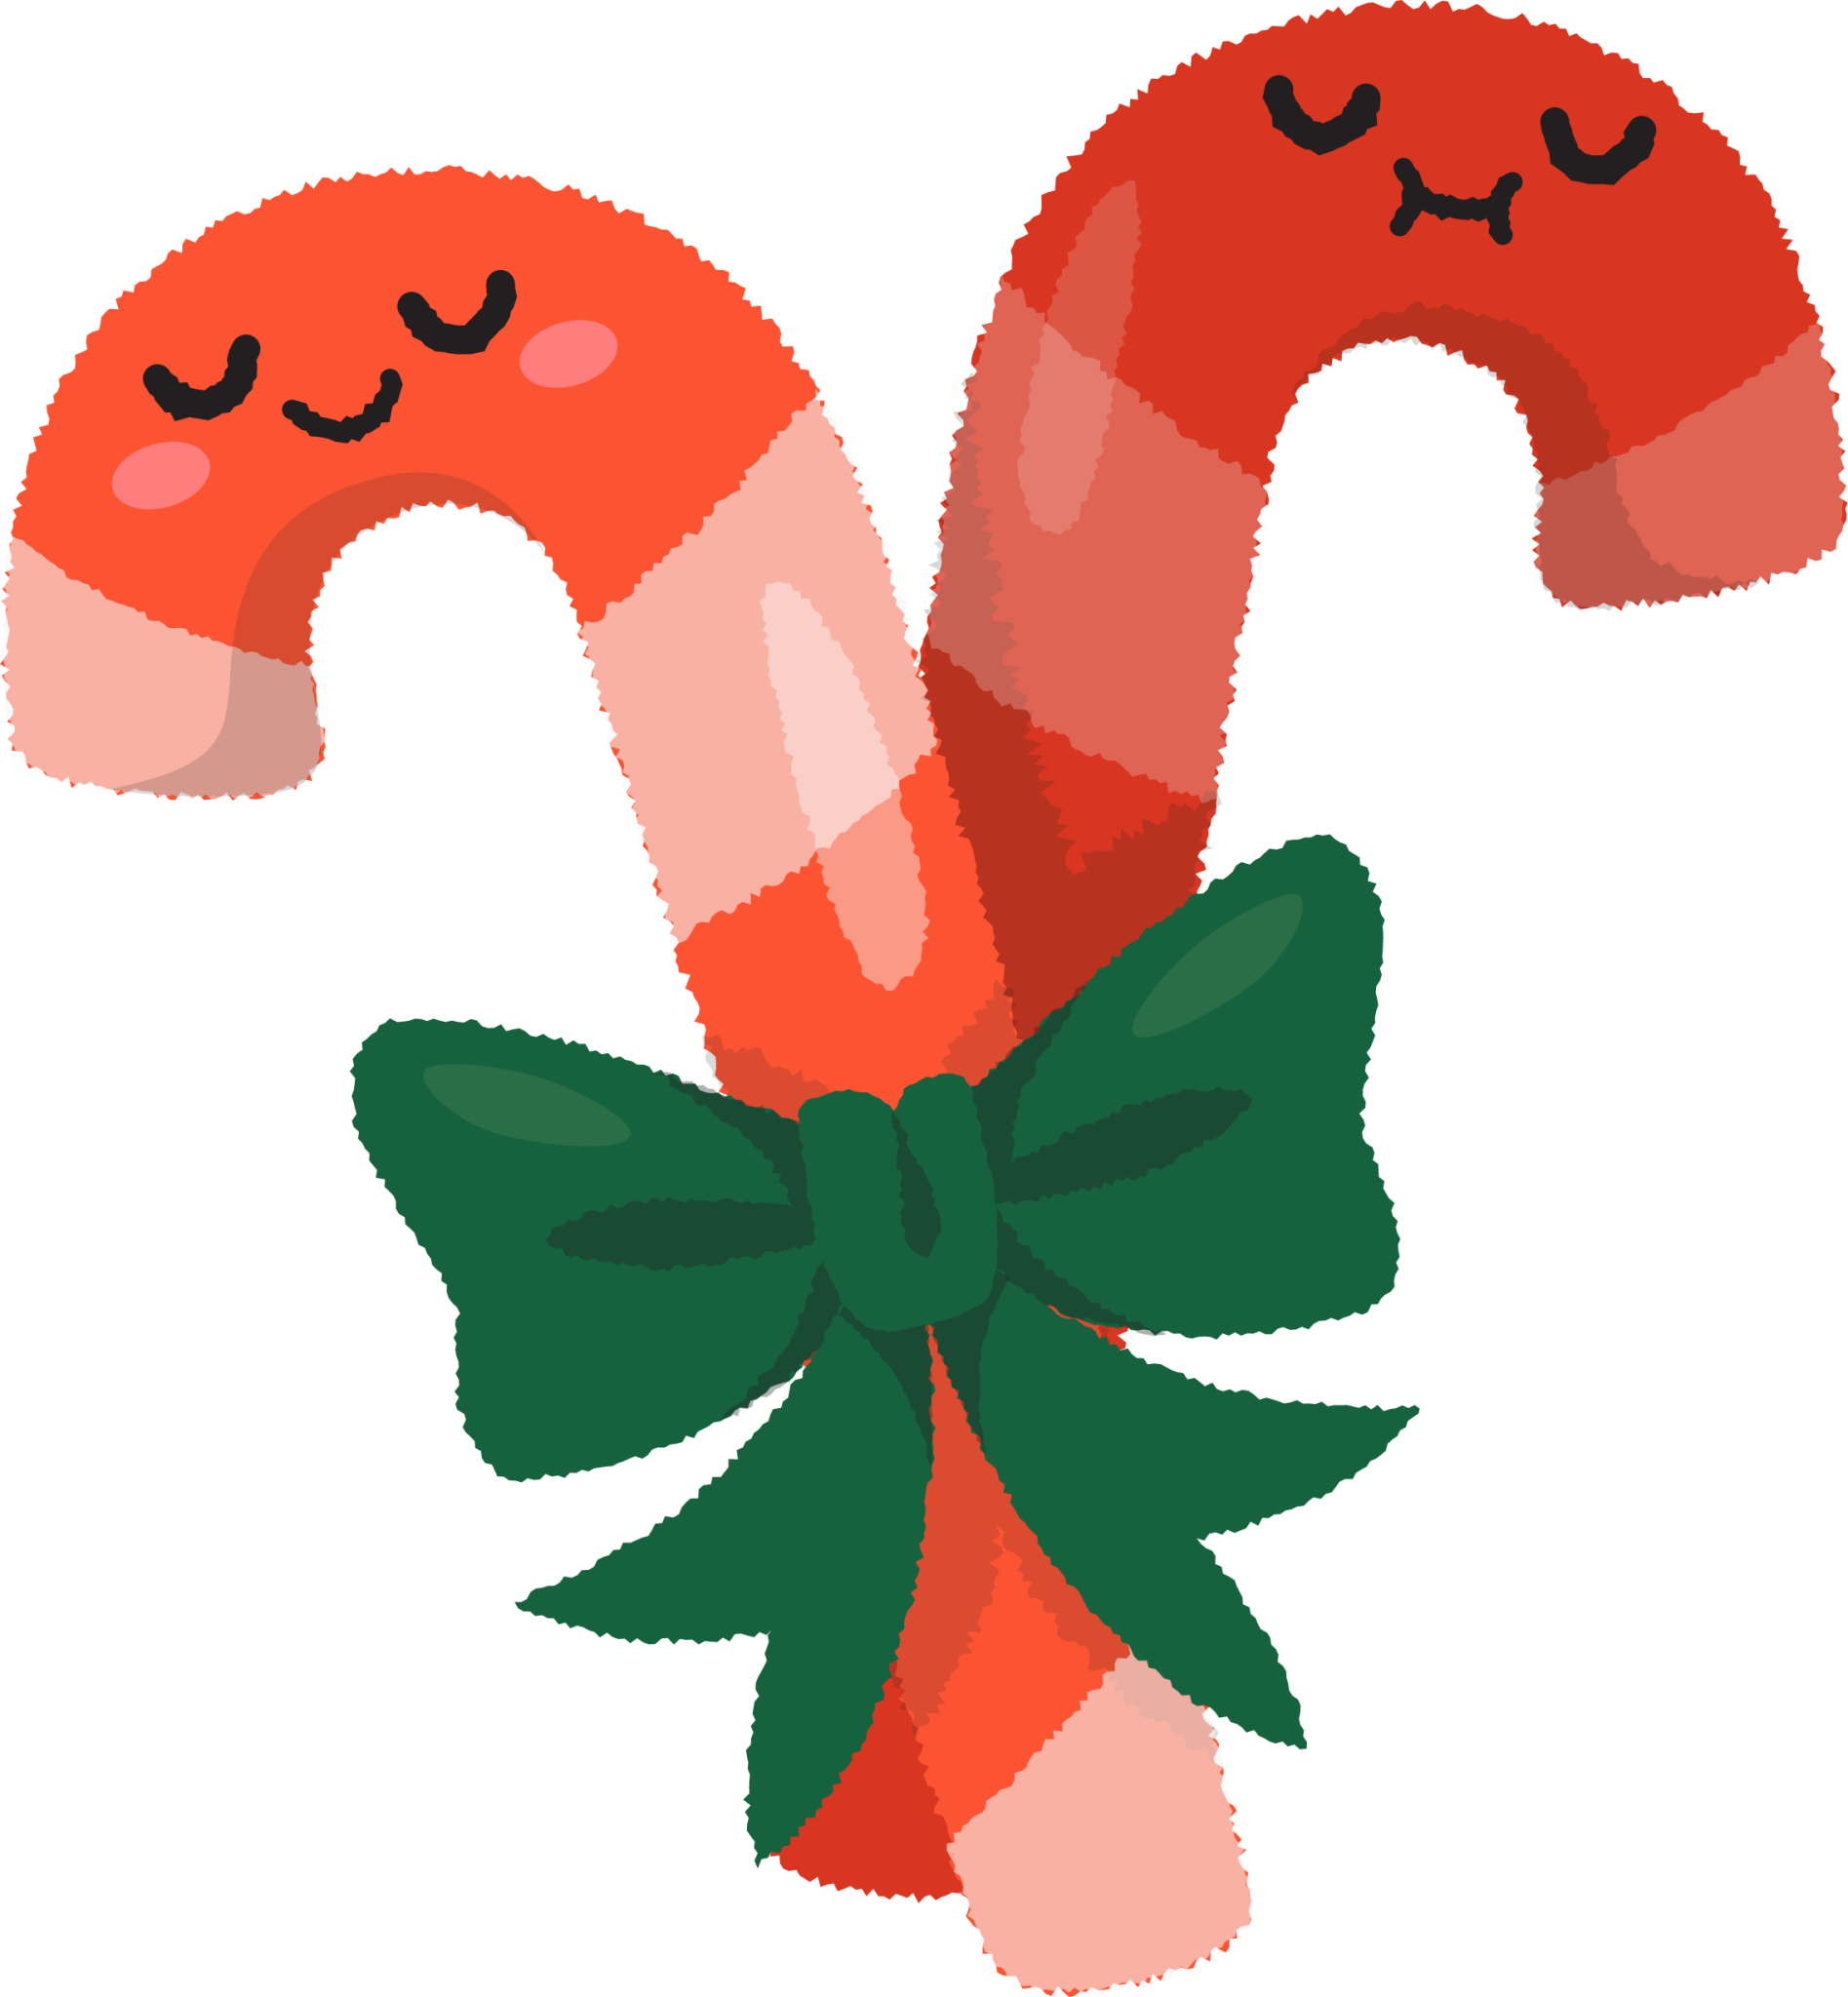 candy cane christmas candy food illustration